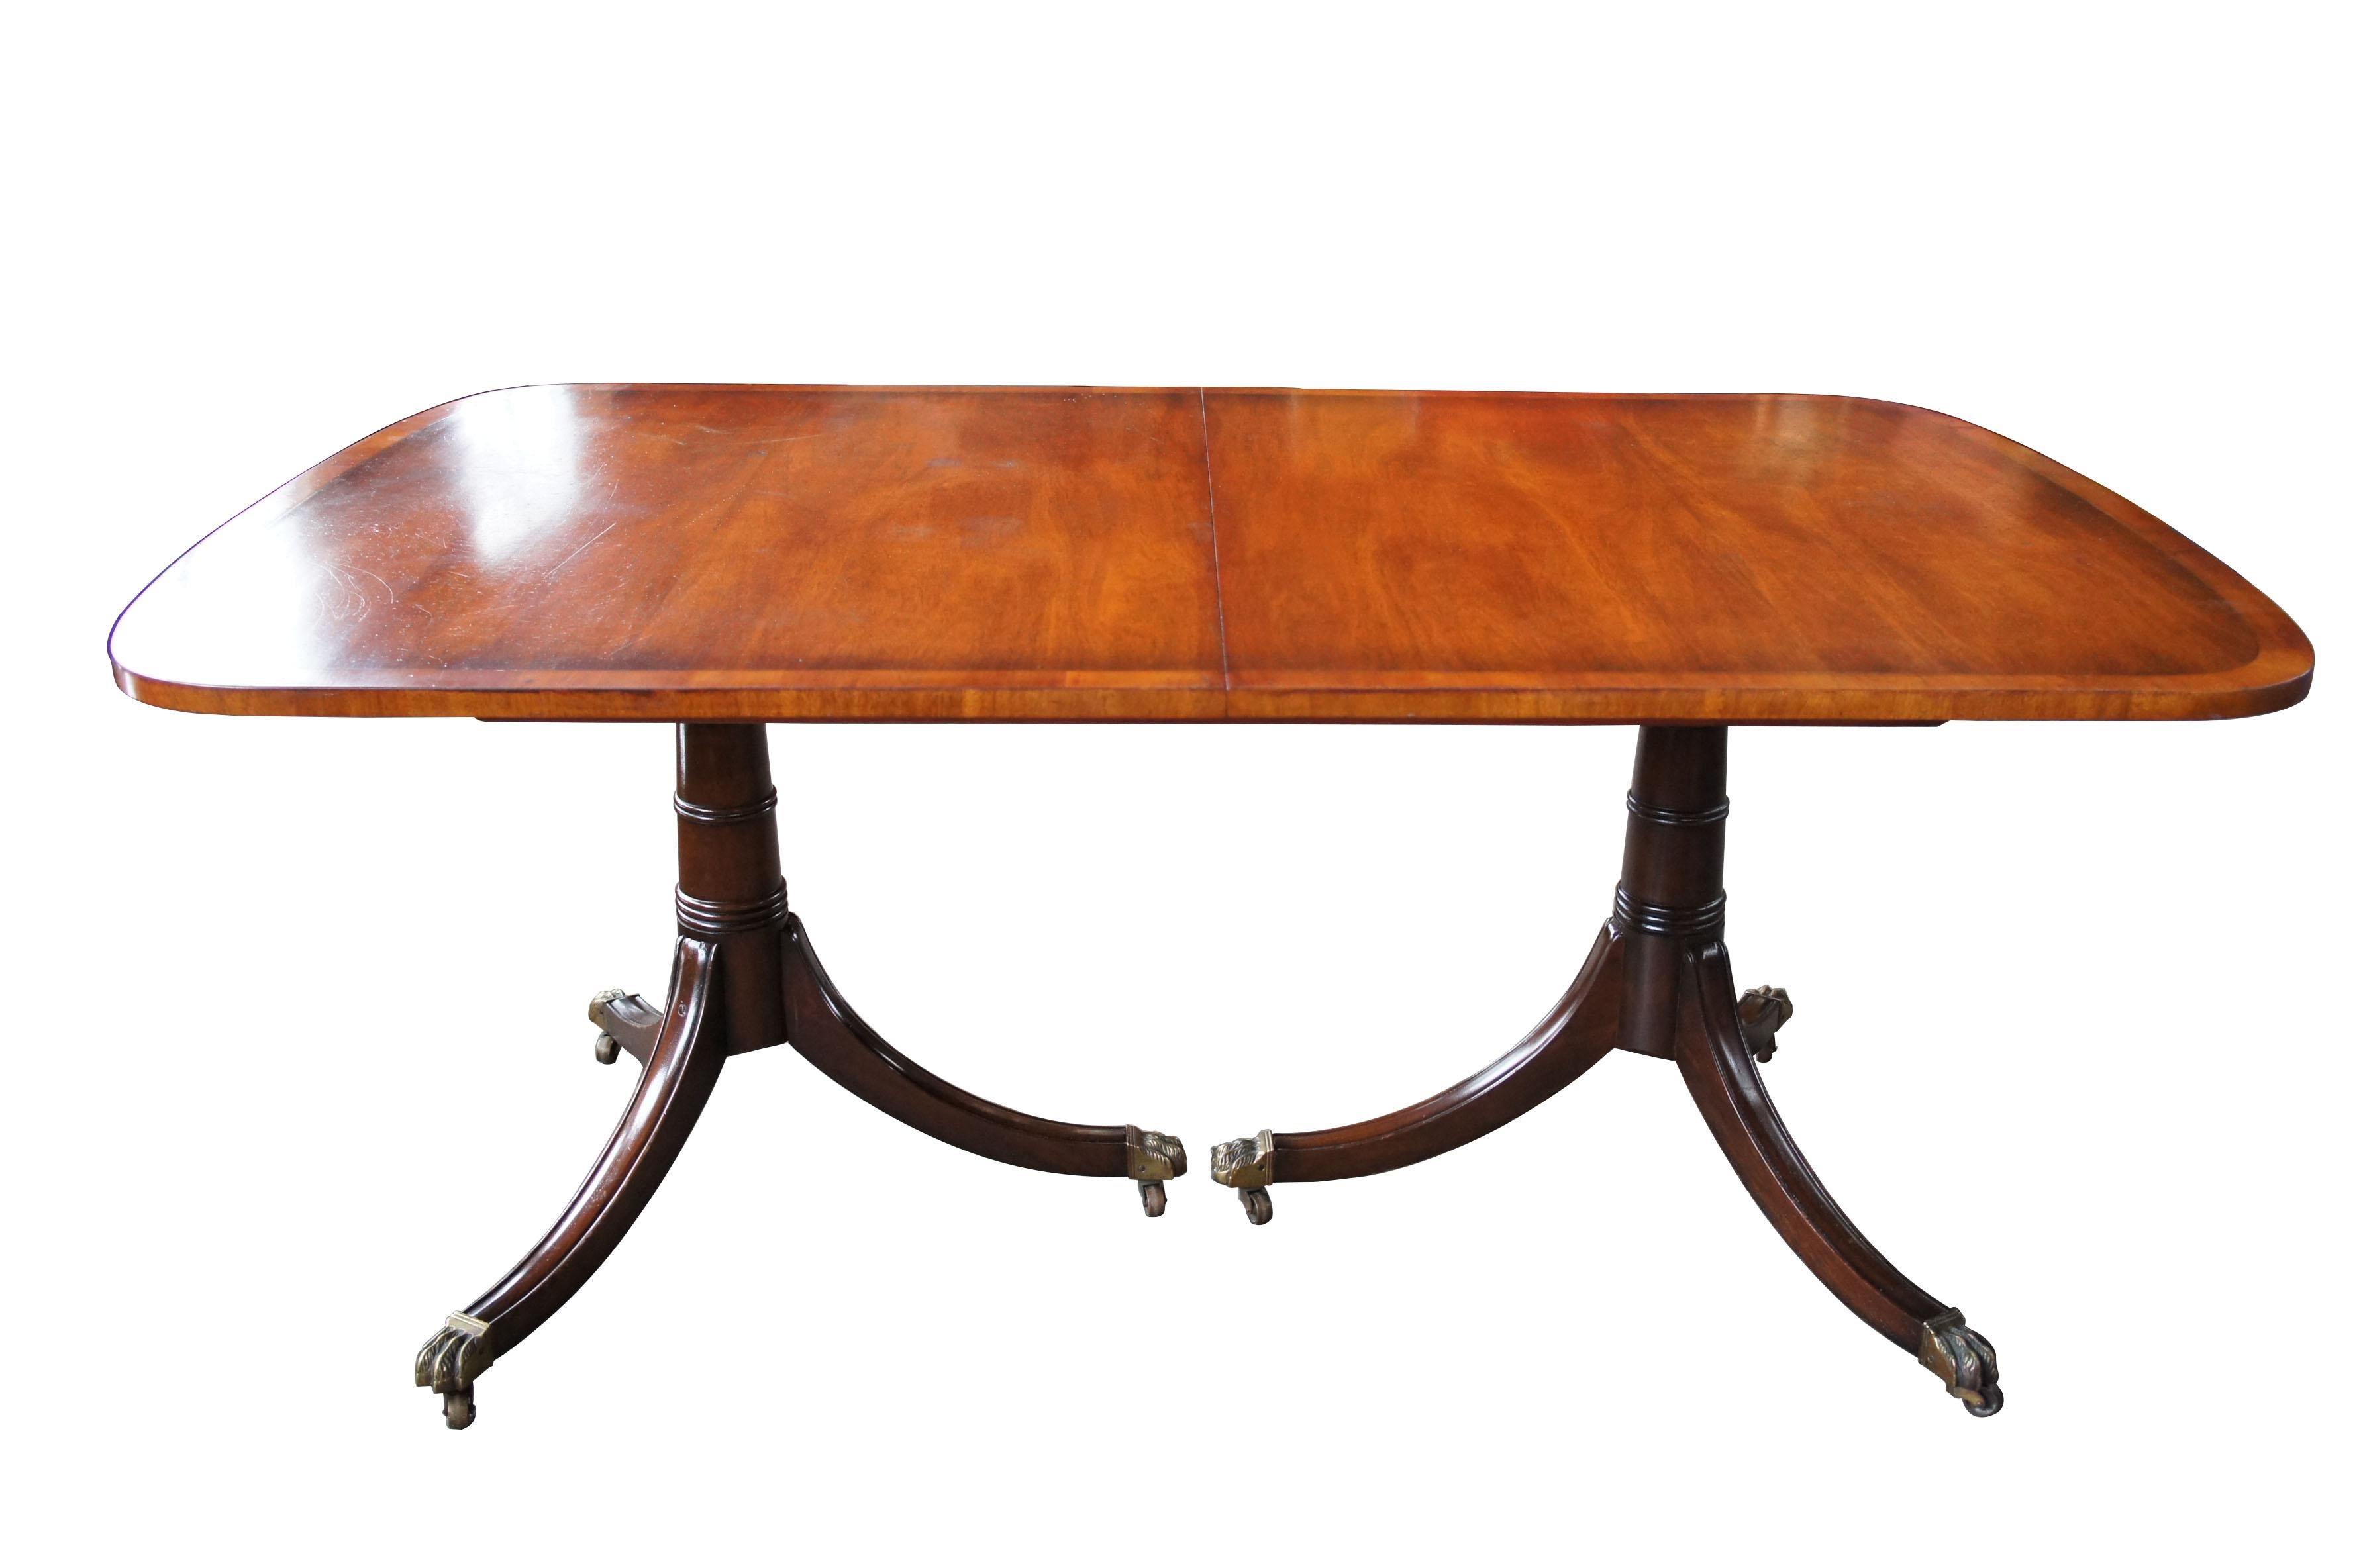 Kittinger antique Duncan Phyfe style banded mahogany dining table claw feet 68